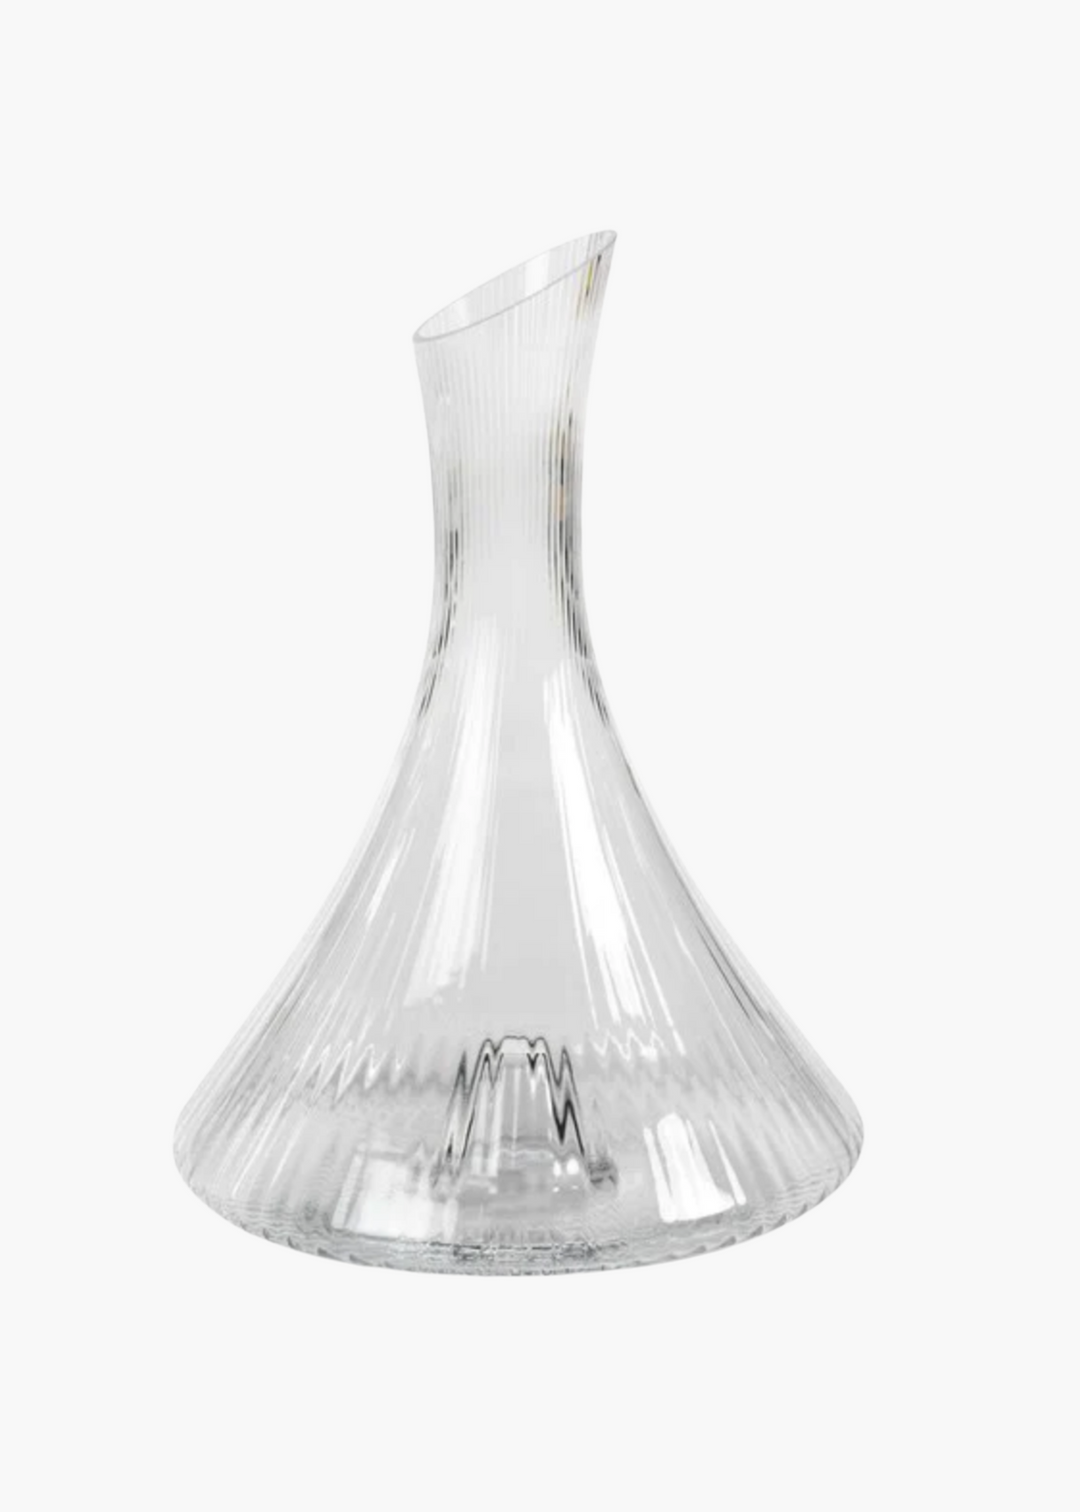 Fluted Decanter